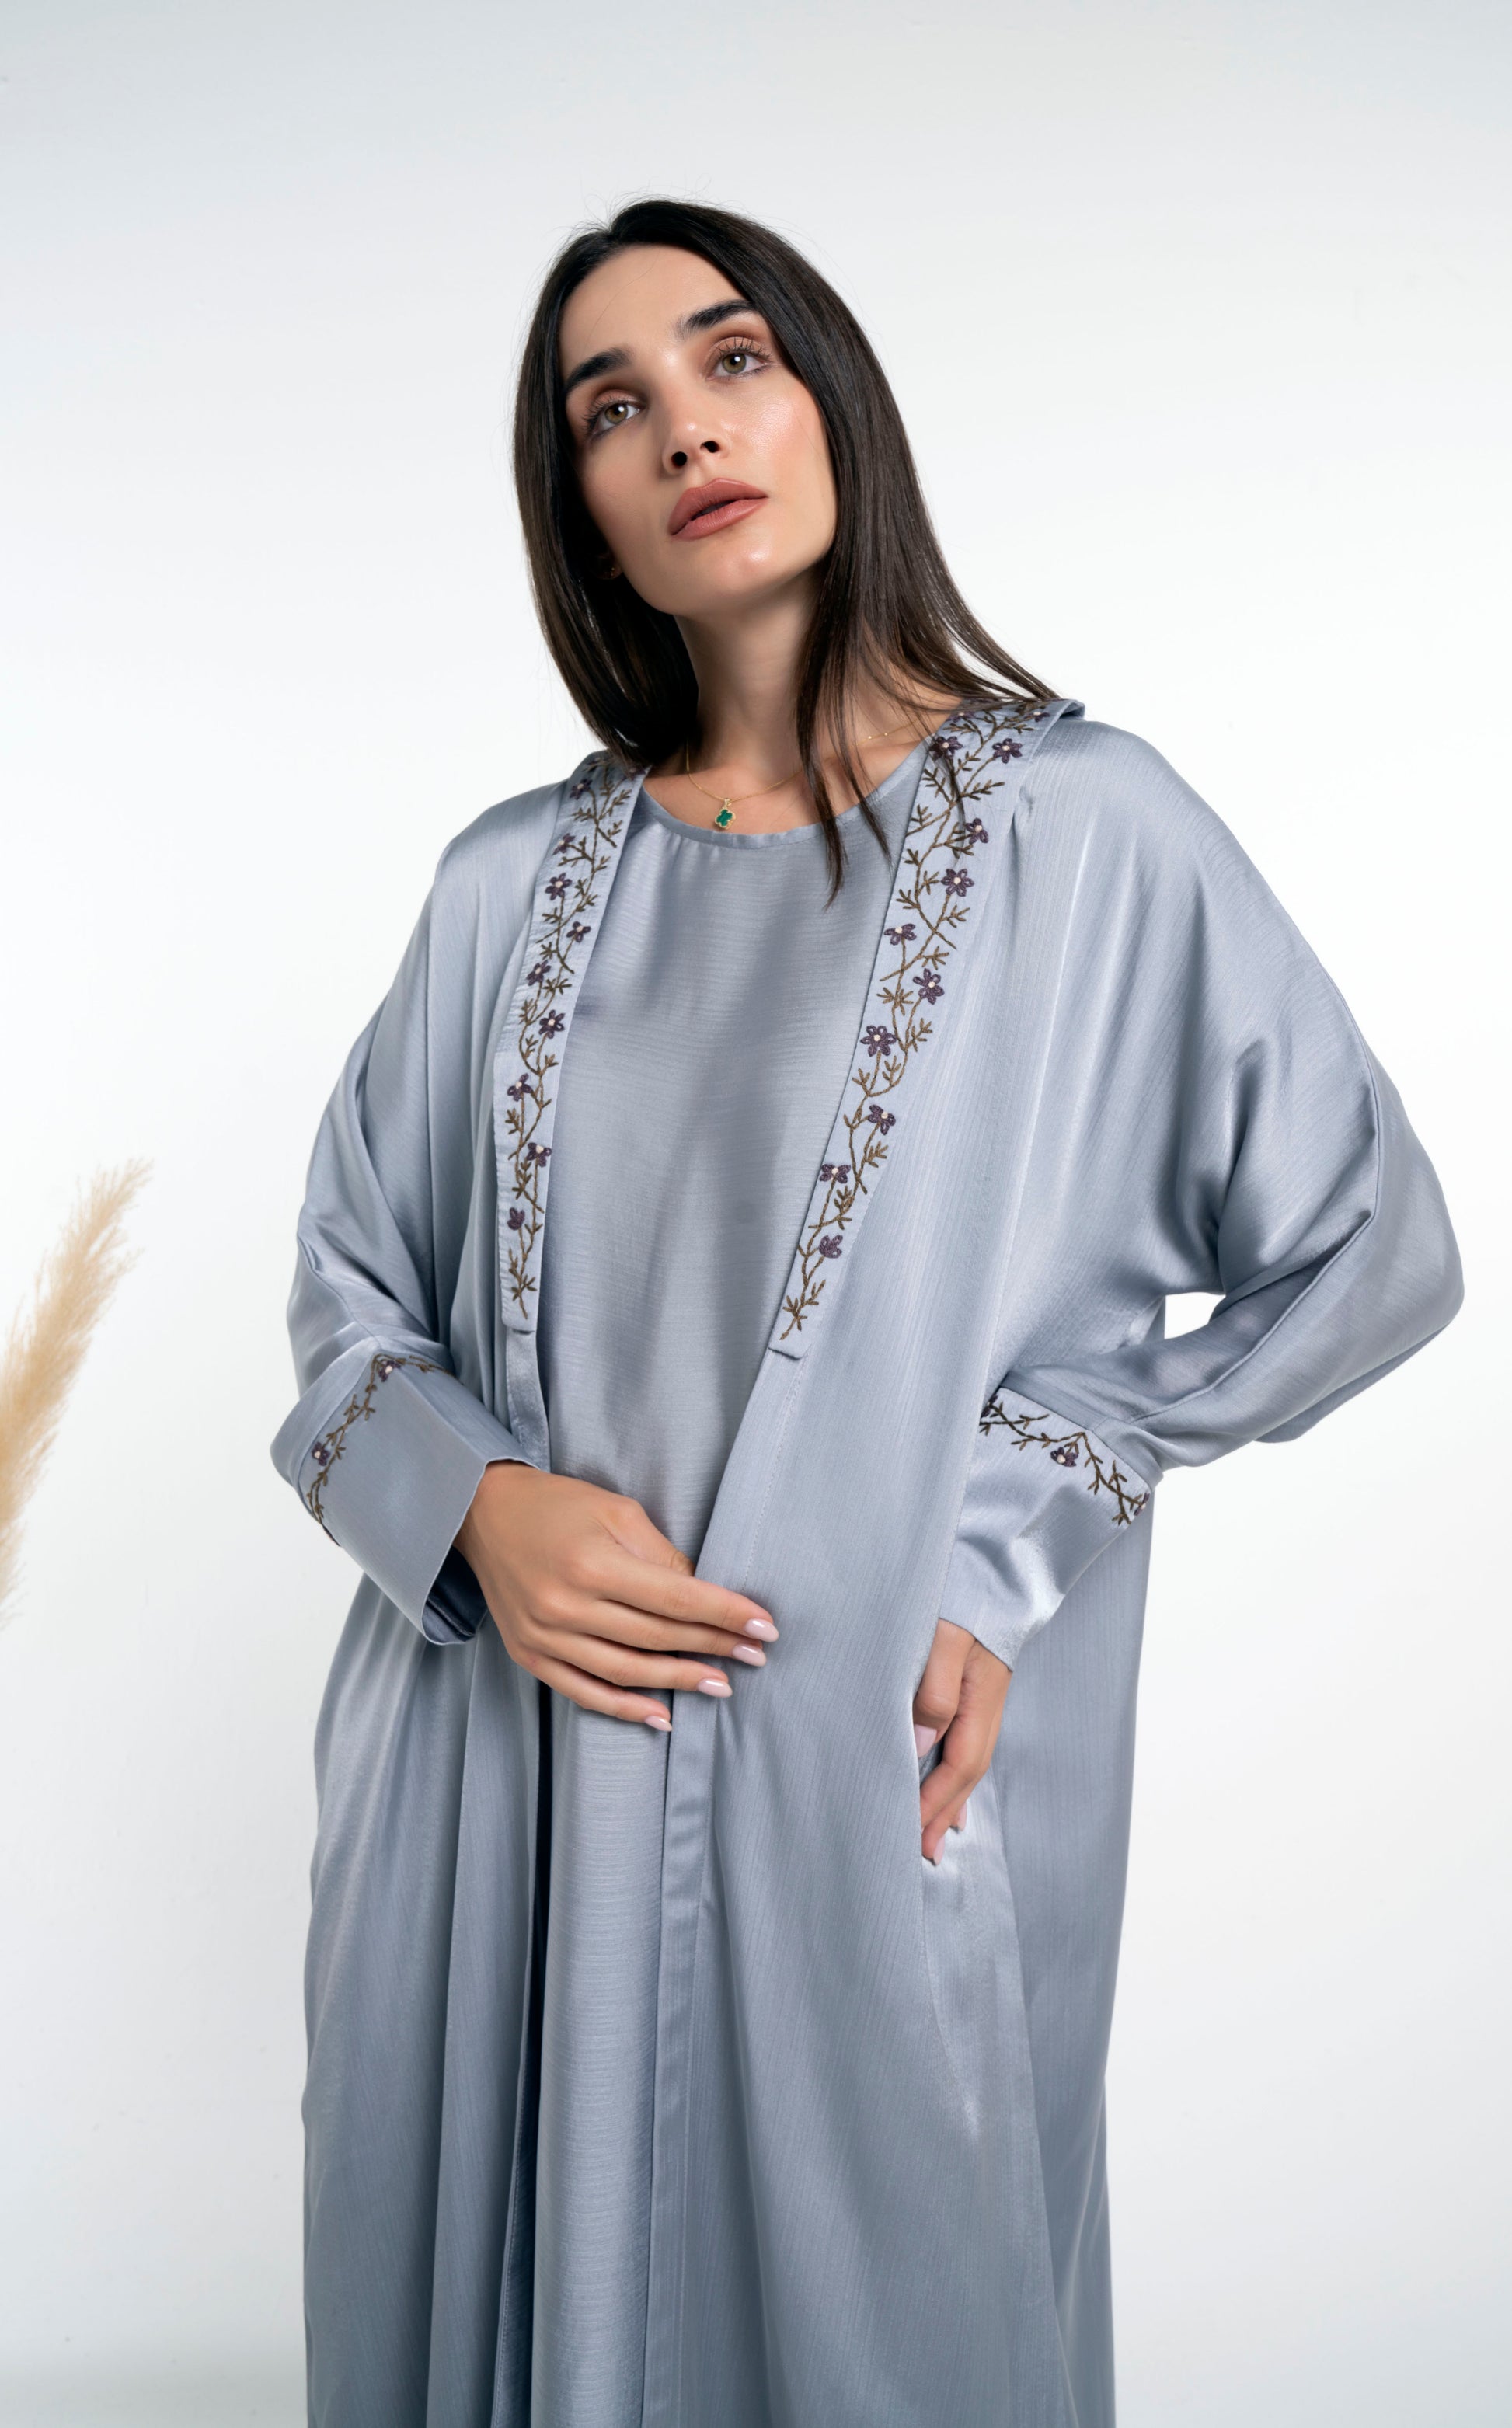 Silk satin abaya with floral embroidery on collar and cuff sleeves